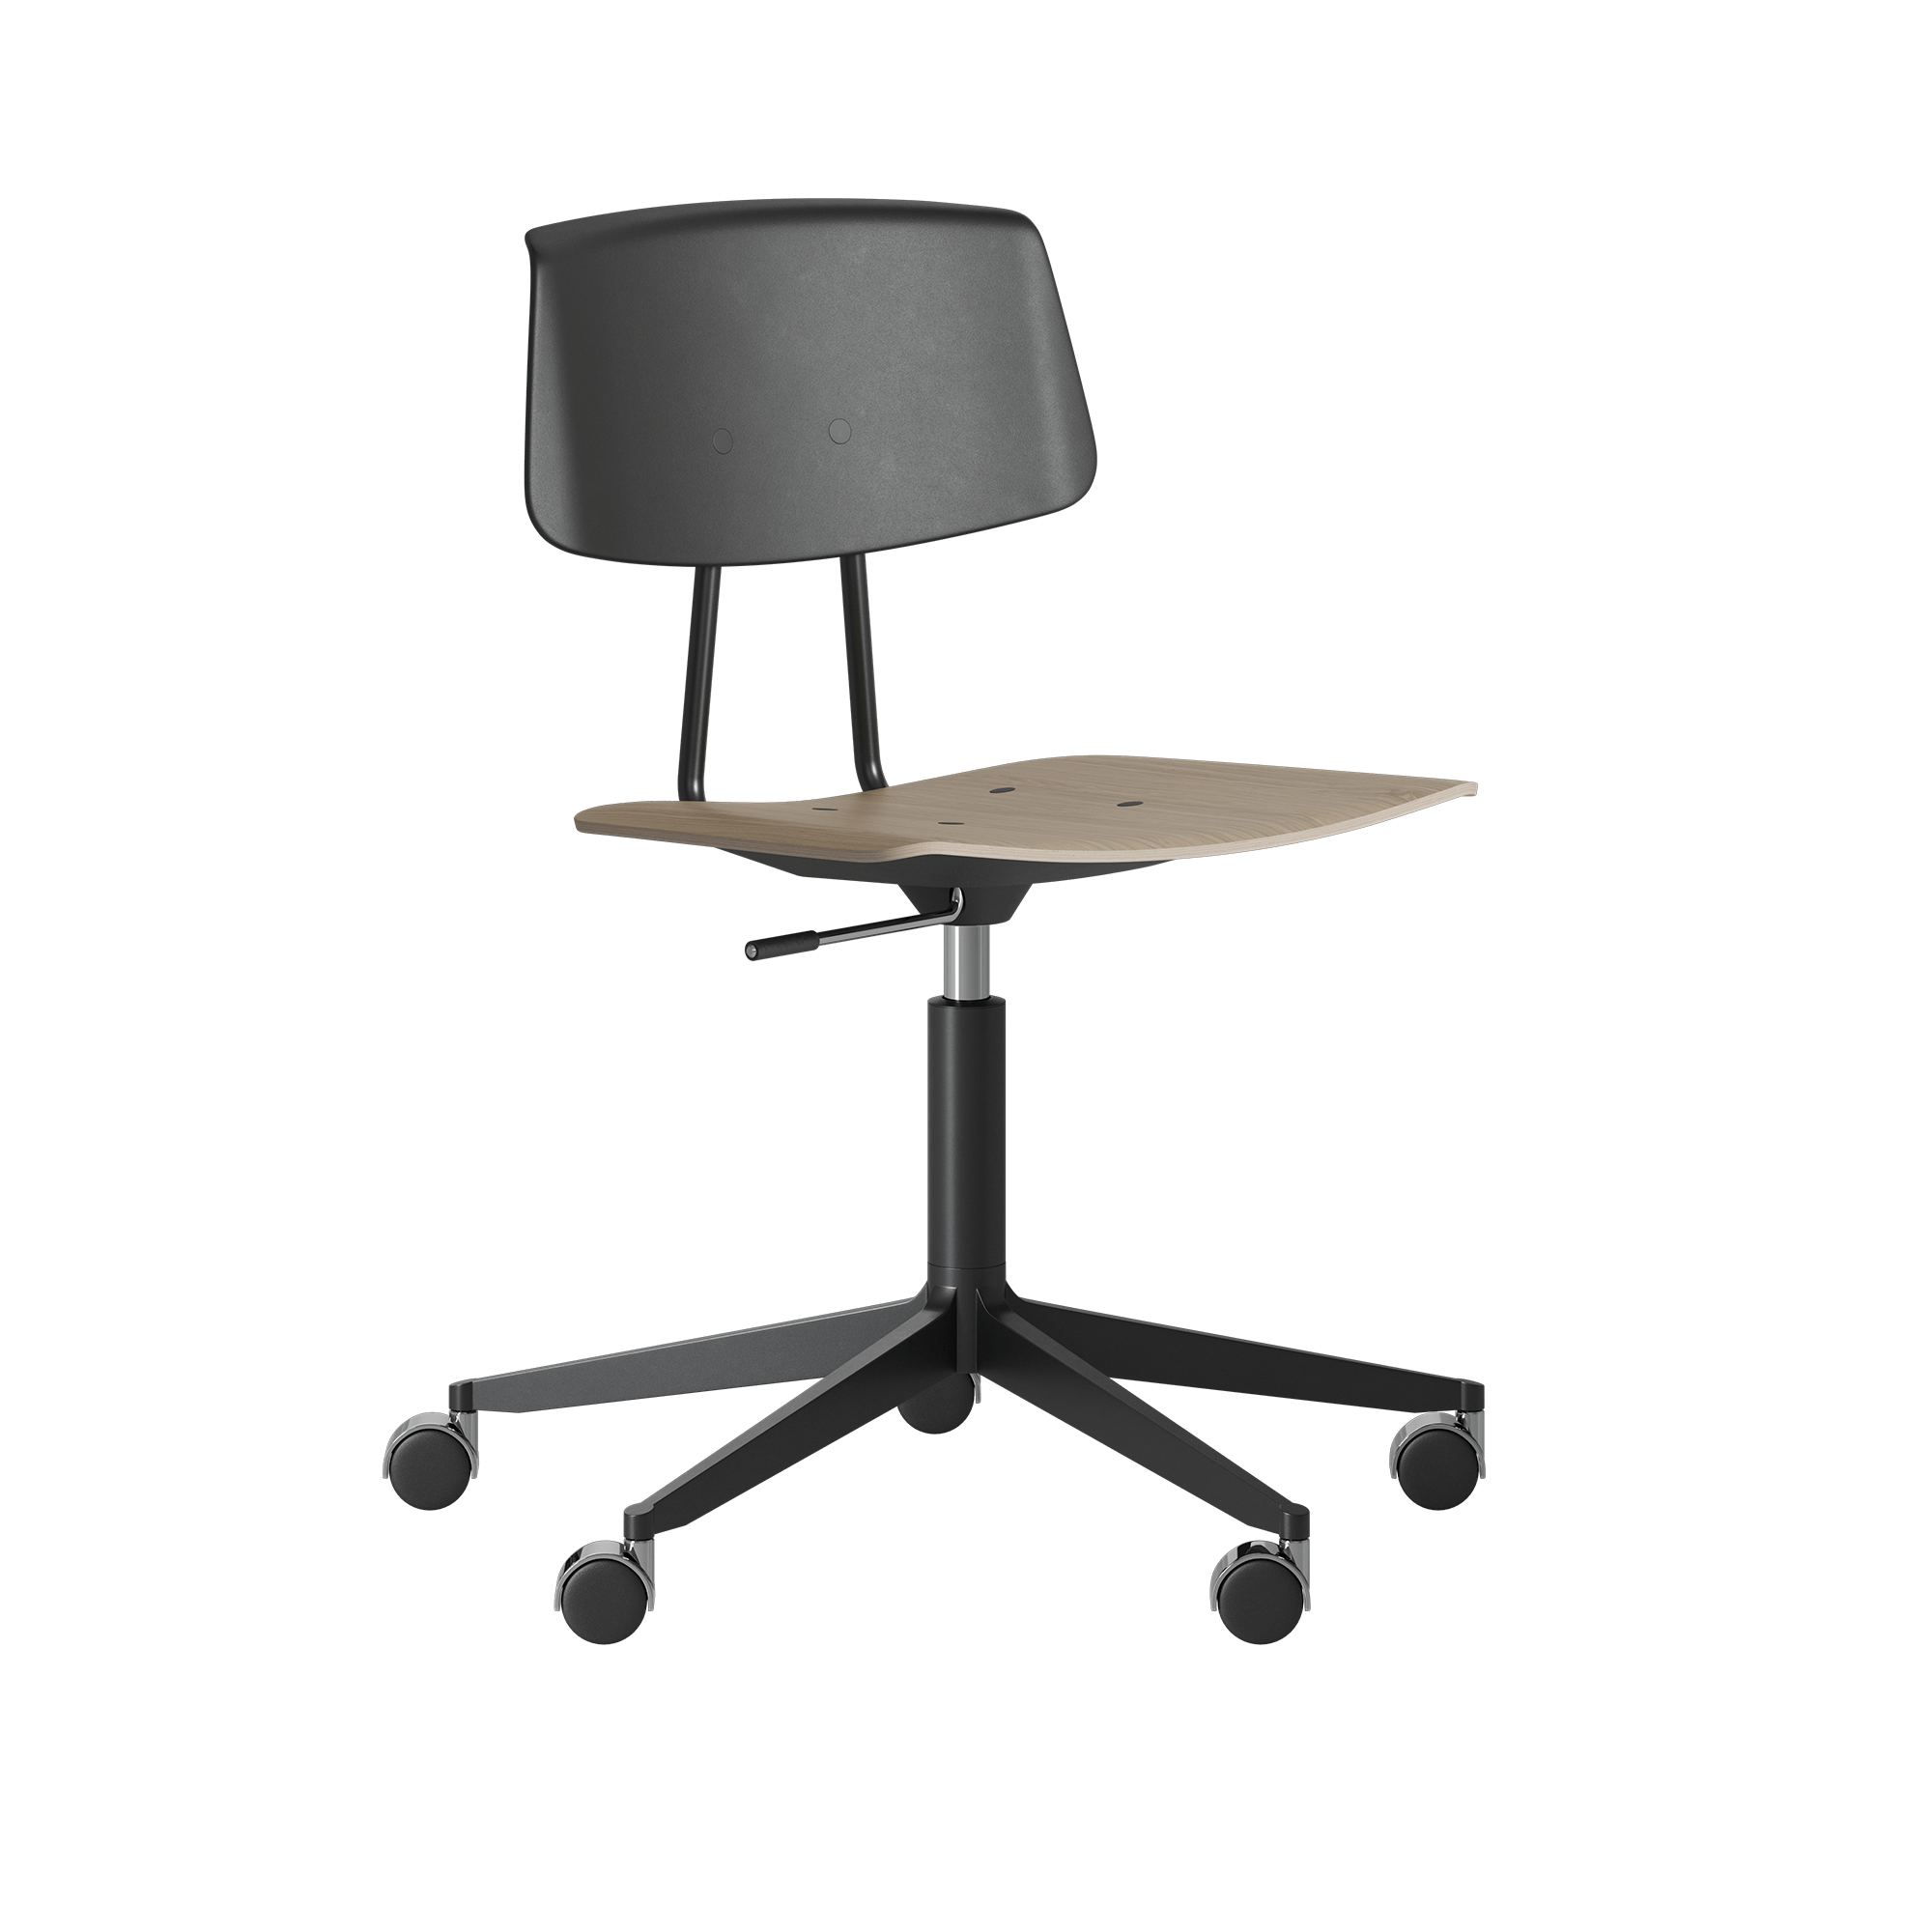 A Share Move Alu 20 office desk chair